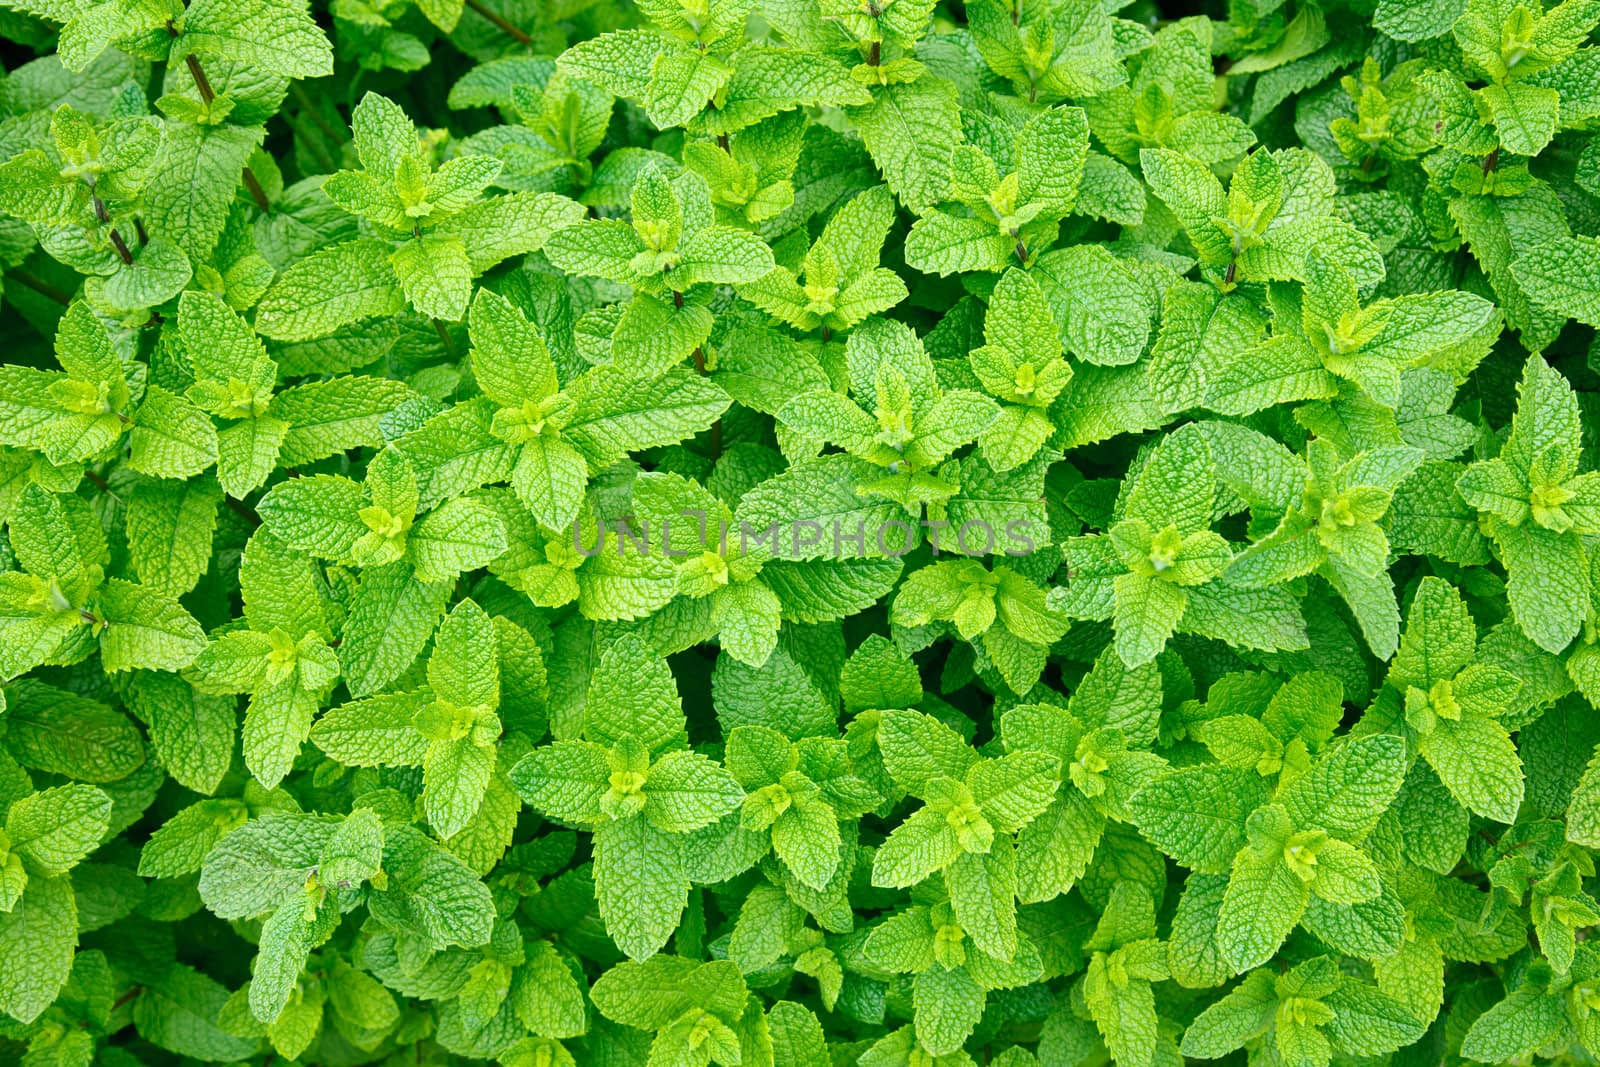 Green mint leaves close-up background